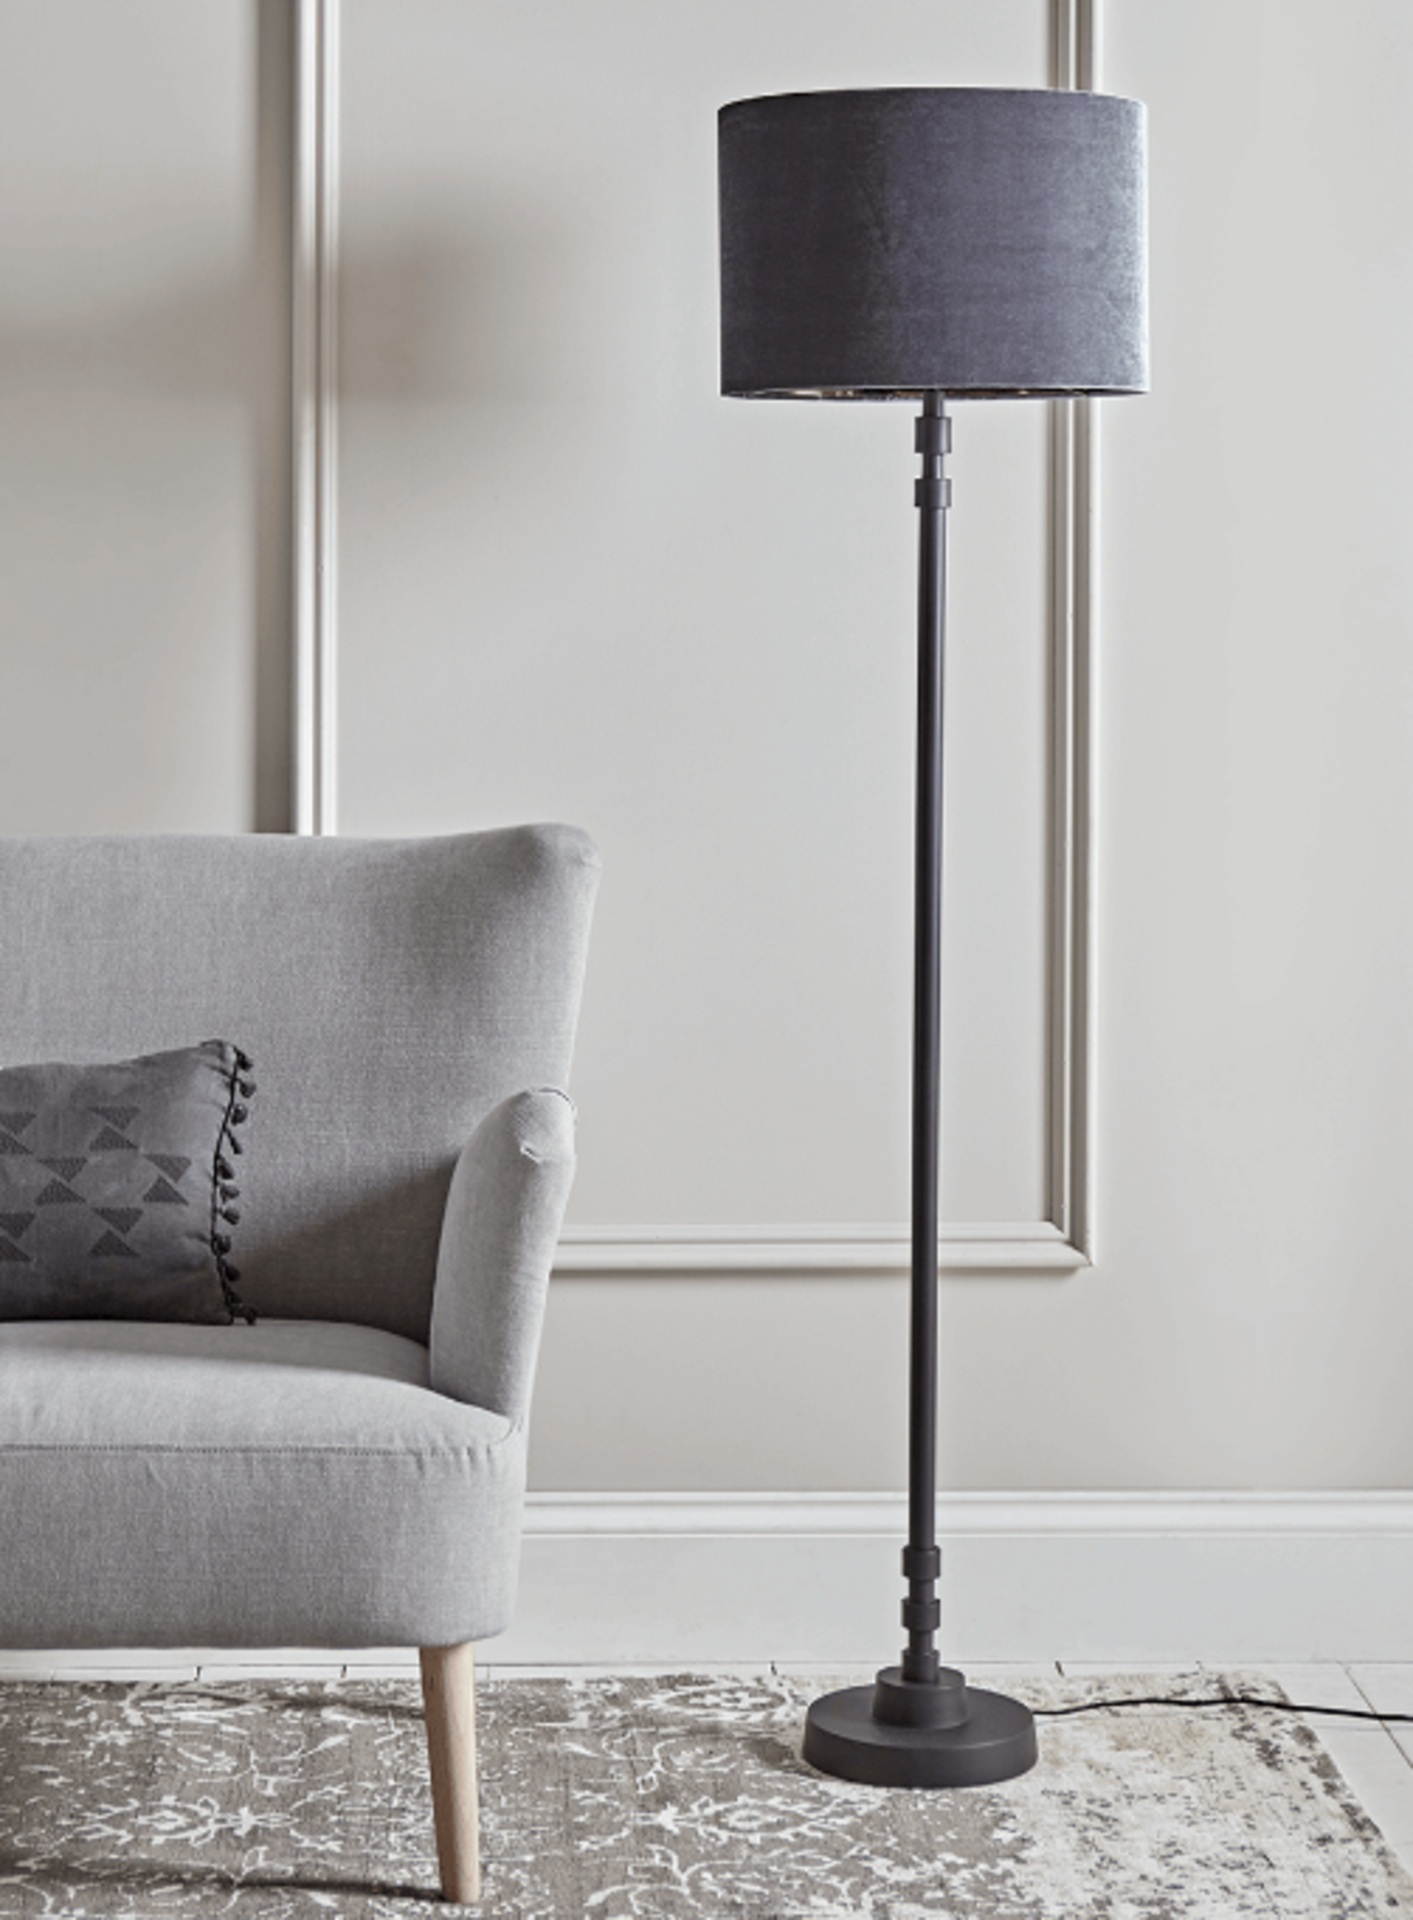 Cox & Cox Grey & Black Floor Lamp RRP £305.00. With a tall form, slender base and barrel shaped